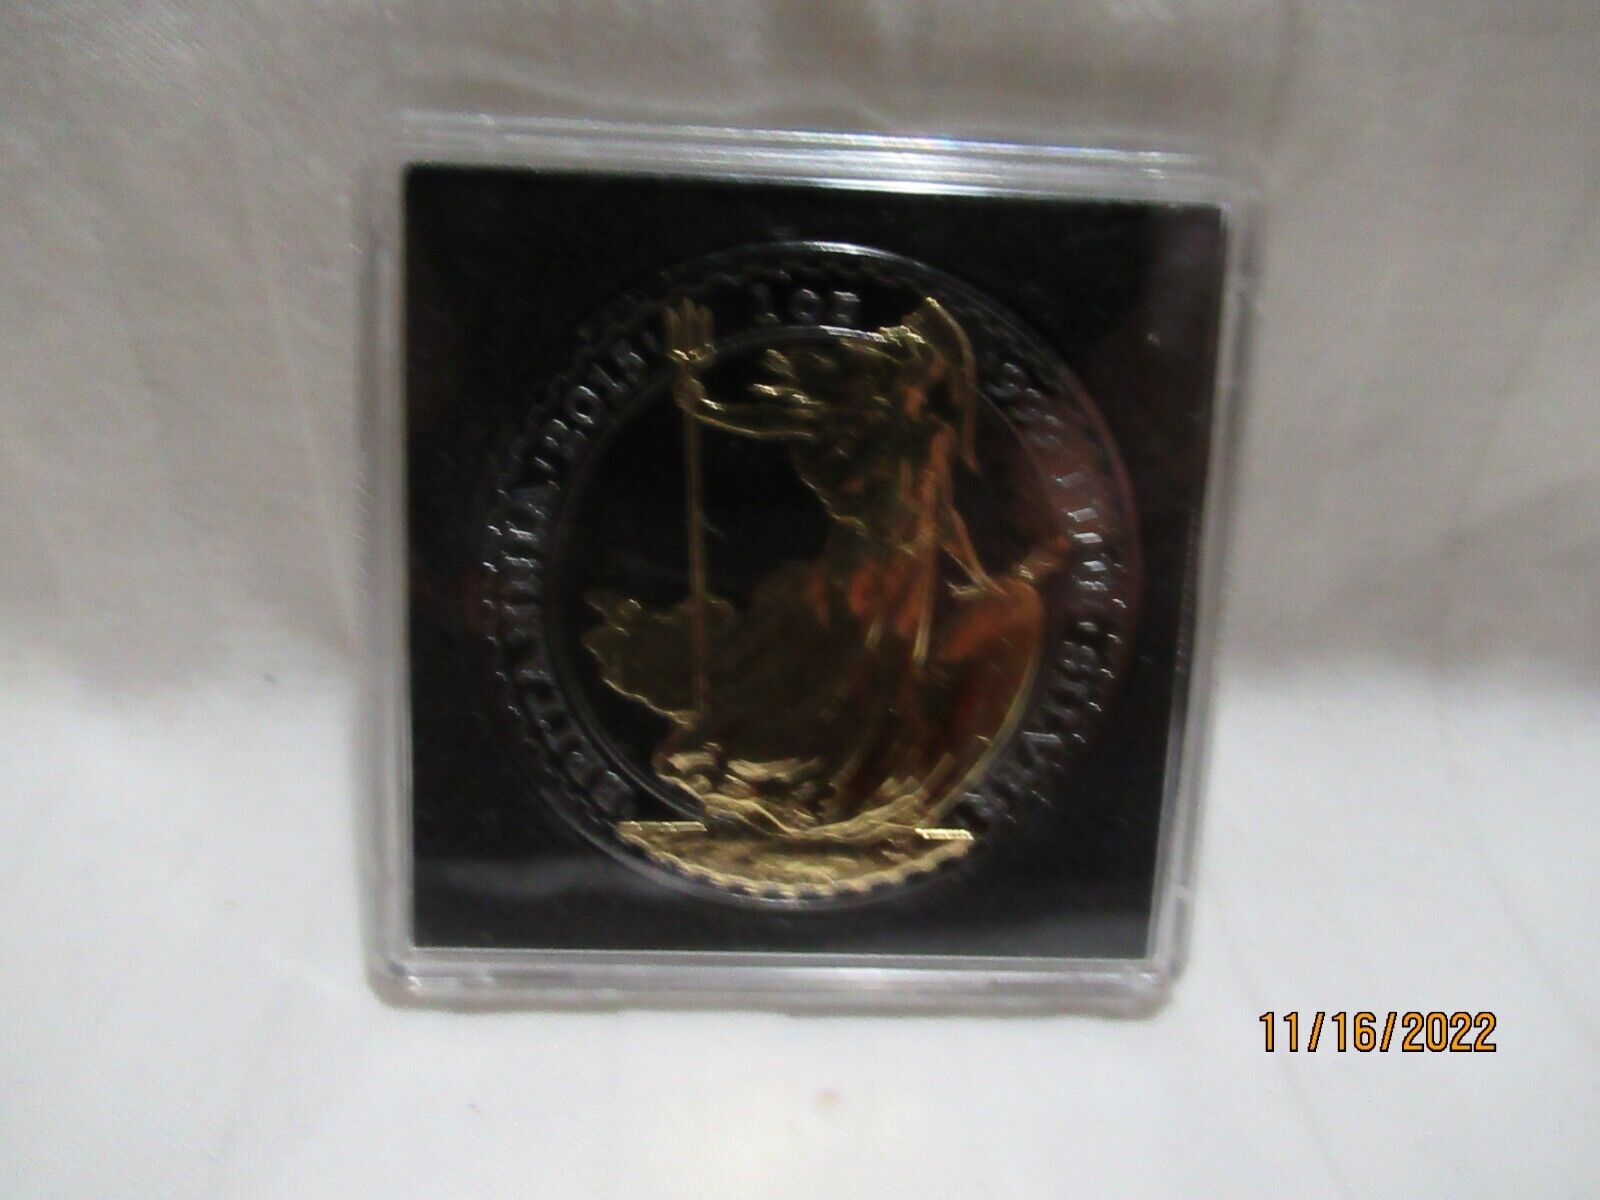 GOLDEN ENIGMA 2015 G.B. 2 POUNDS 1 OZ .999 SILVER COIN BLACK RUTH. AND 24K GOLD